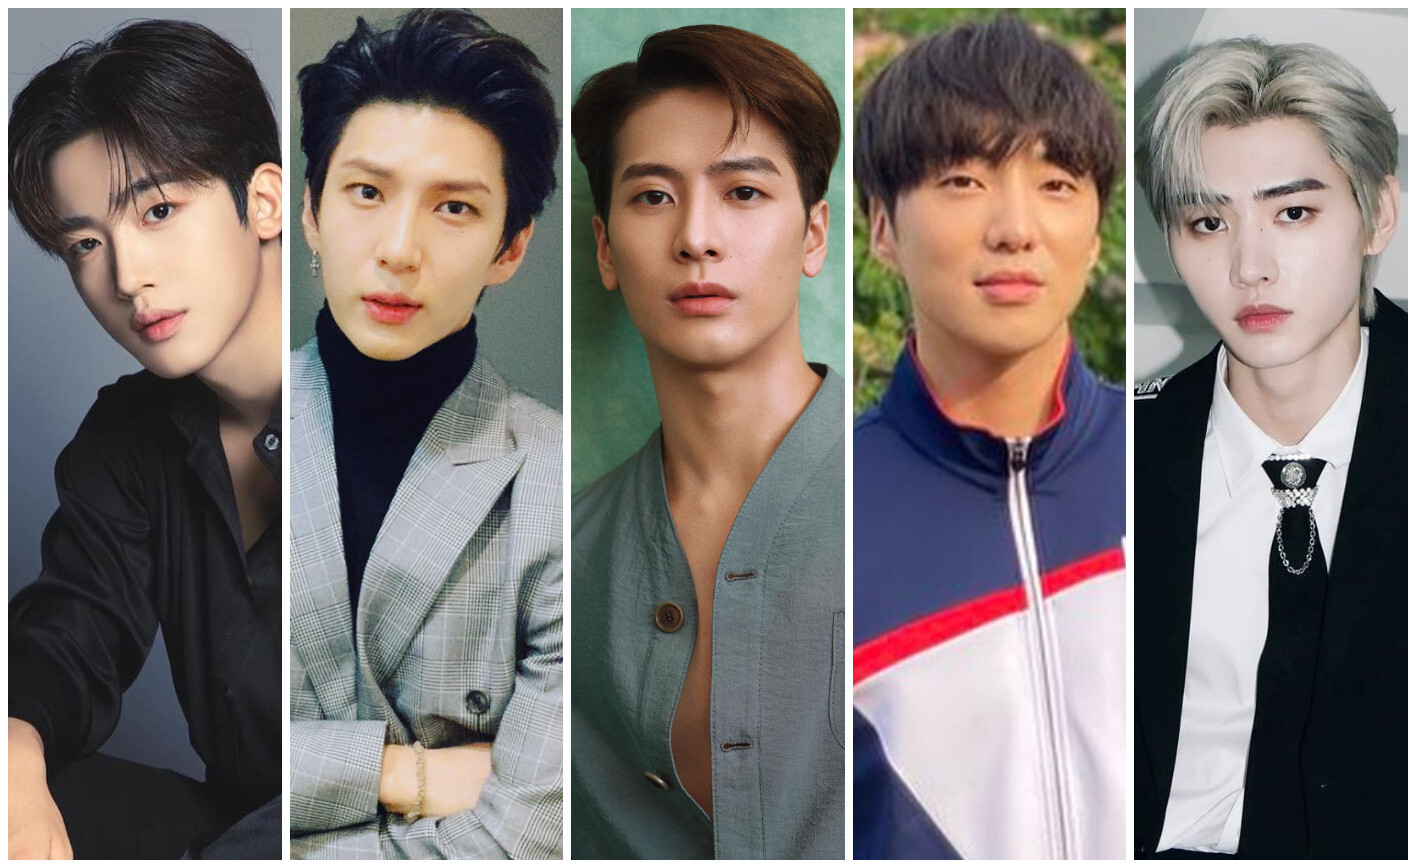 Aside from being super talented and good looking, did you know that these K-pop idols used to be star athletes? Photos: @official_yohan, @leo_jungtw, @jacksonwang852g7/Instagram, @thankuyoonn, @sunghoon.enhypen/Instagram